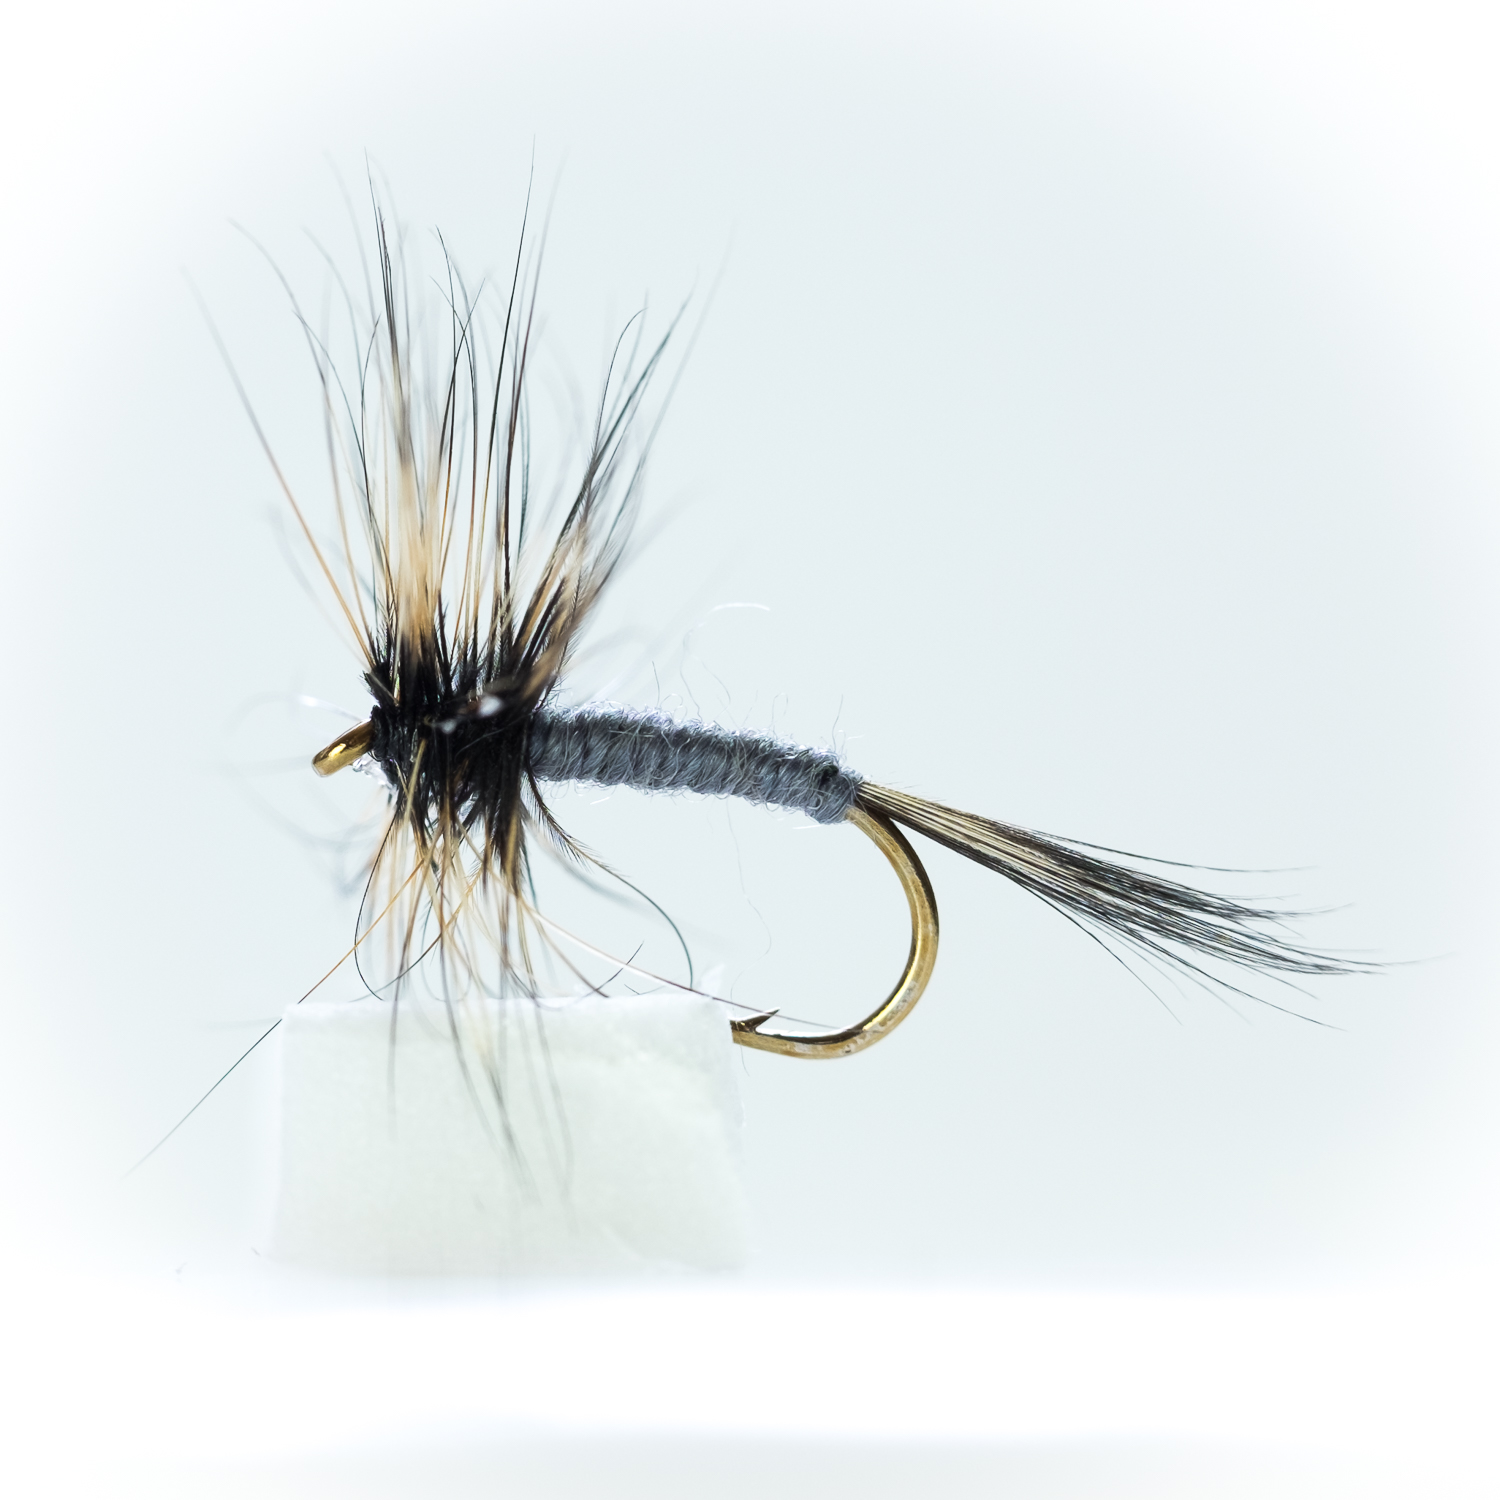 trout / grayling dry fly Ref M44 size 14 6 No Grey Duster Parachute 